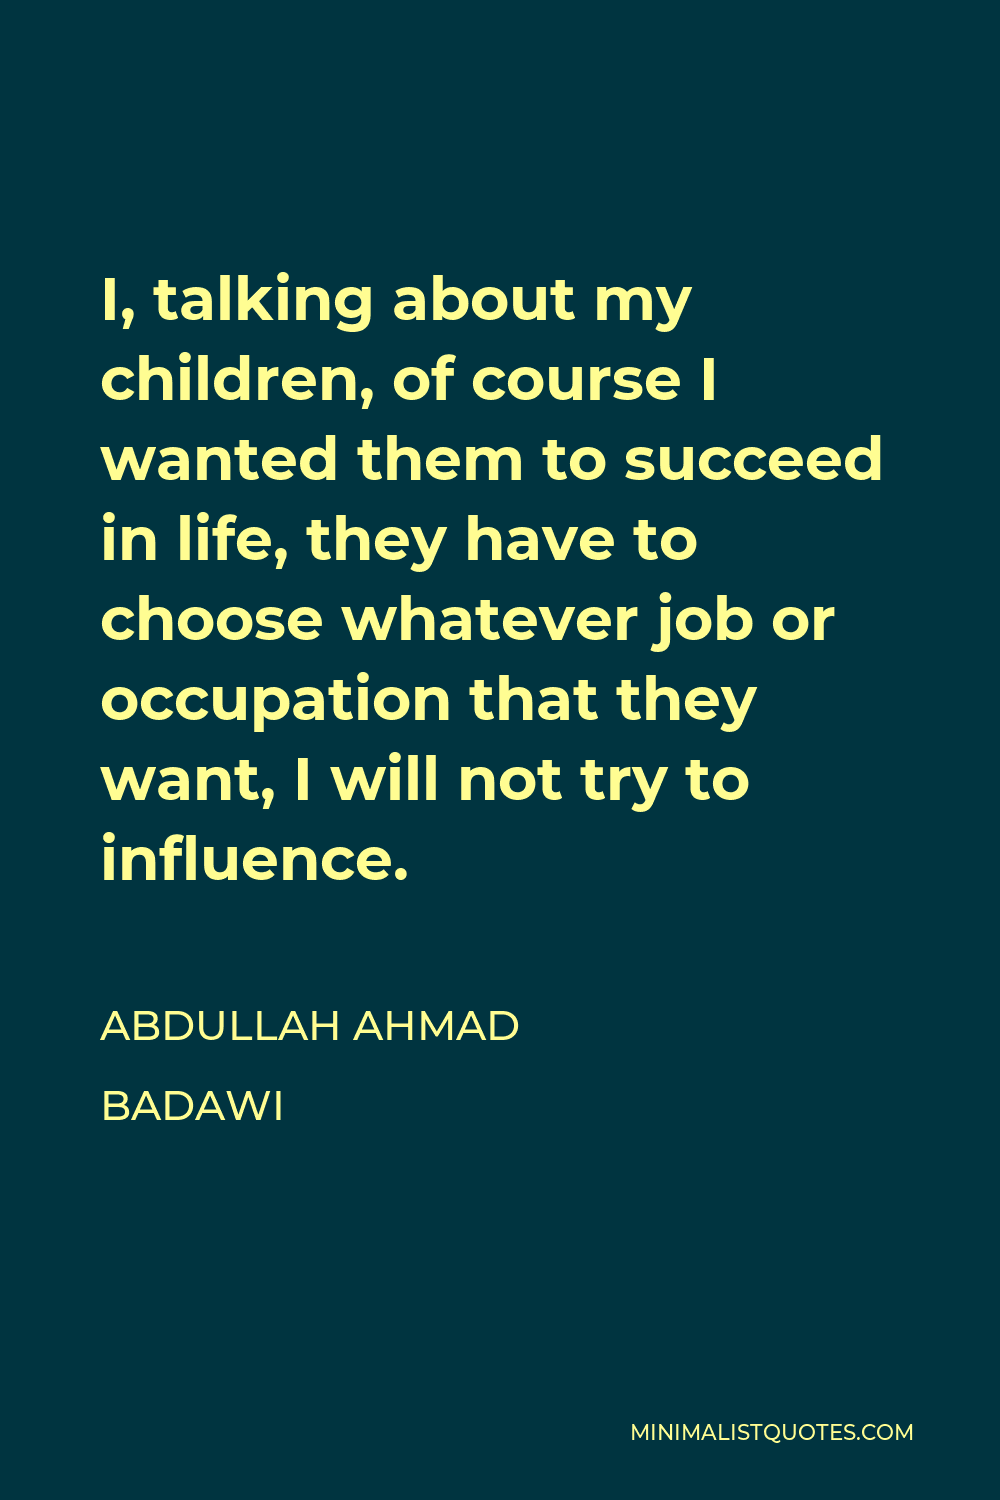 Abdullah Ahmad Badawi Quote - I, talking about my children, of course I wanted them to succeed in life, they have to choose whatever job or occupation that they want, I will not try to influence.